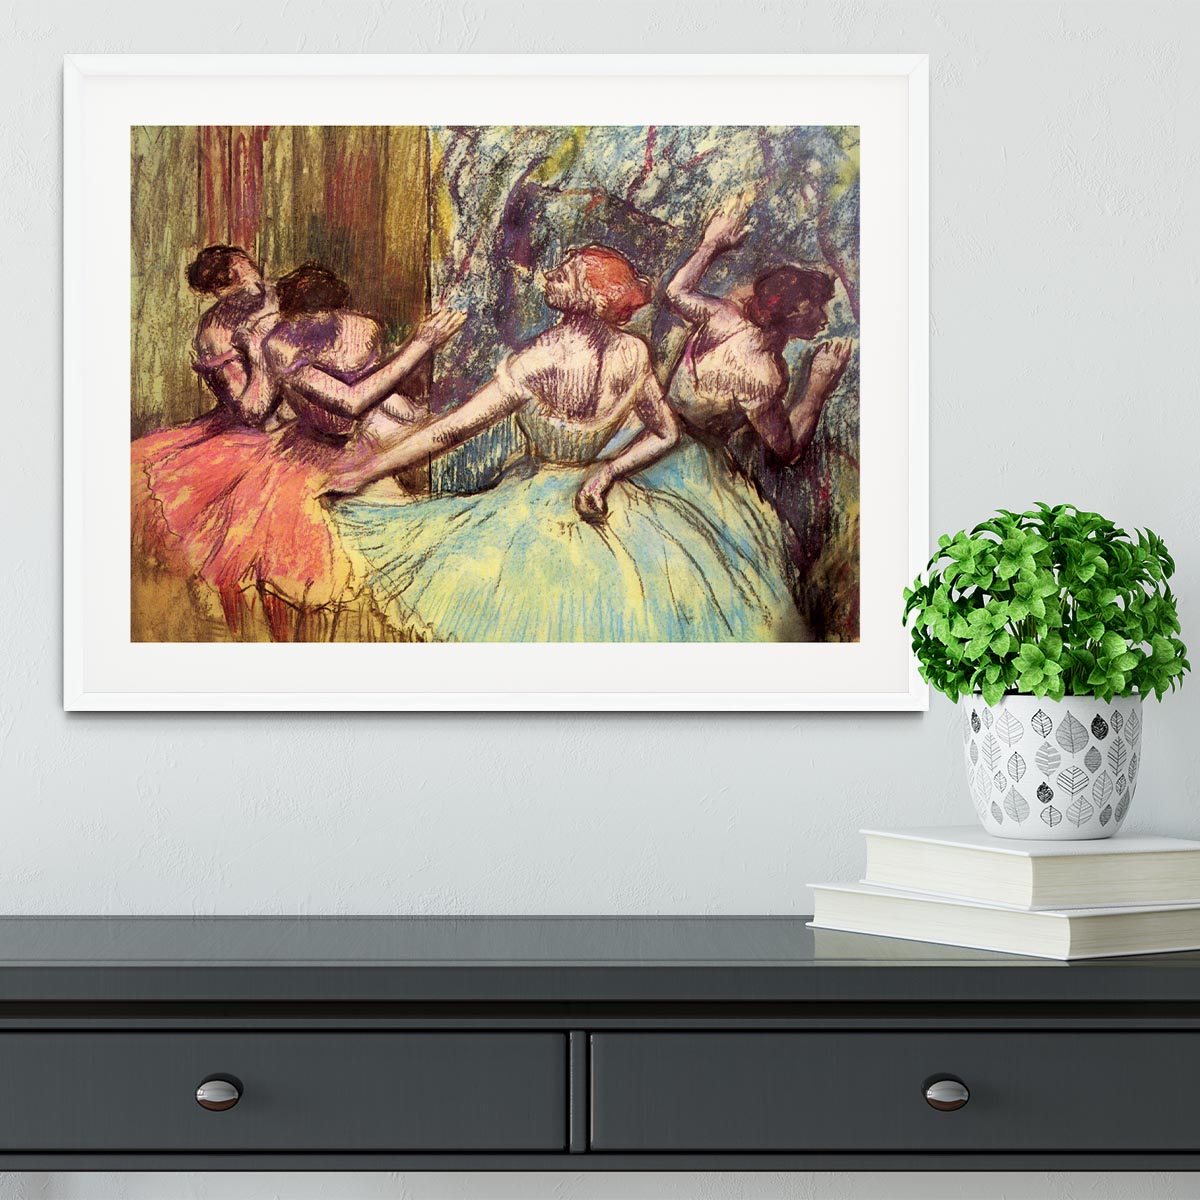 Four dancers behind the scenes 2 by Degas Framed Print - Canvas Art Rocks - 5